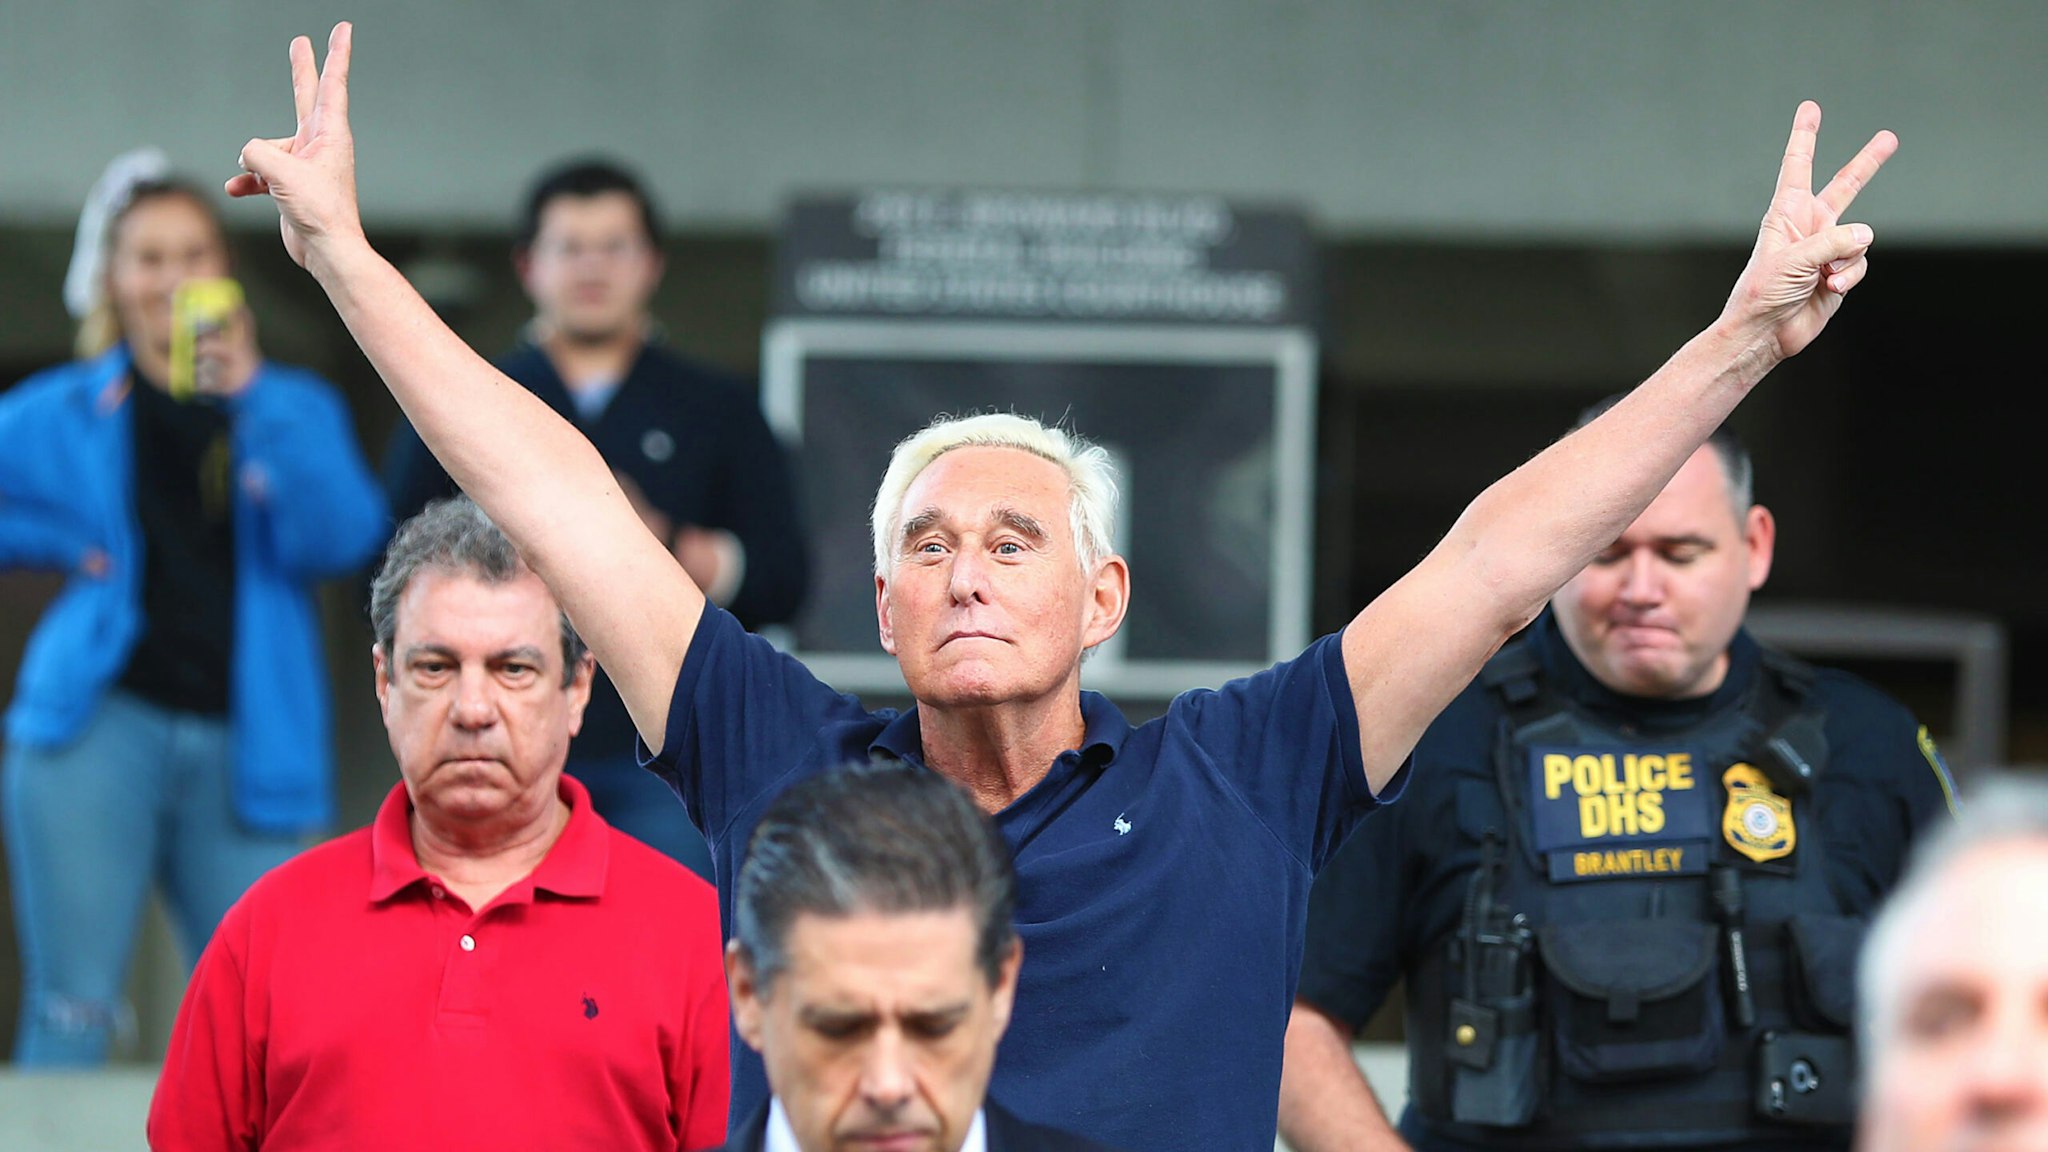 FORT LAUDERDALE, FLORIDA - JANUARY 25: Roger Stone, a former advisor to President Donald Trump, exits the Federal Courthouse on January 25, 2019 in Fort Lauderdale, Florida. Mr. Stone was charged by special counsel Robert Mueller of obstruction, giving false statements and witness tampering.